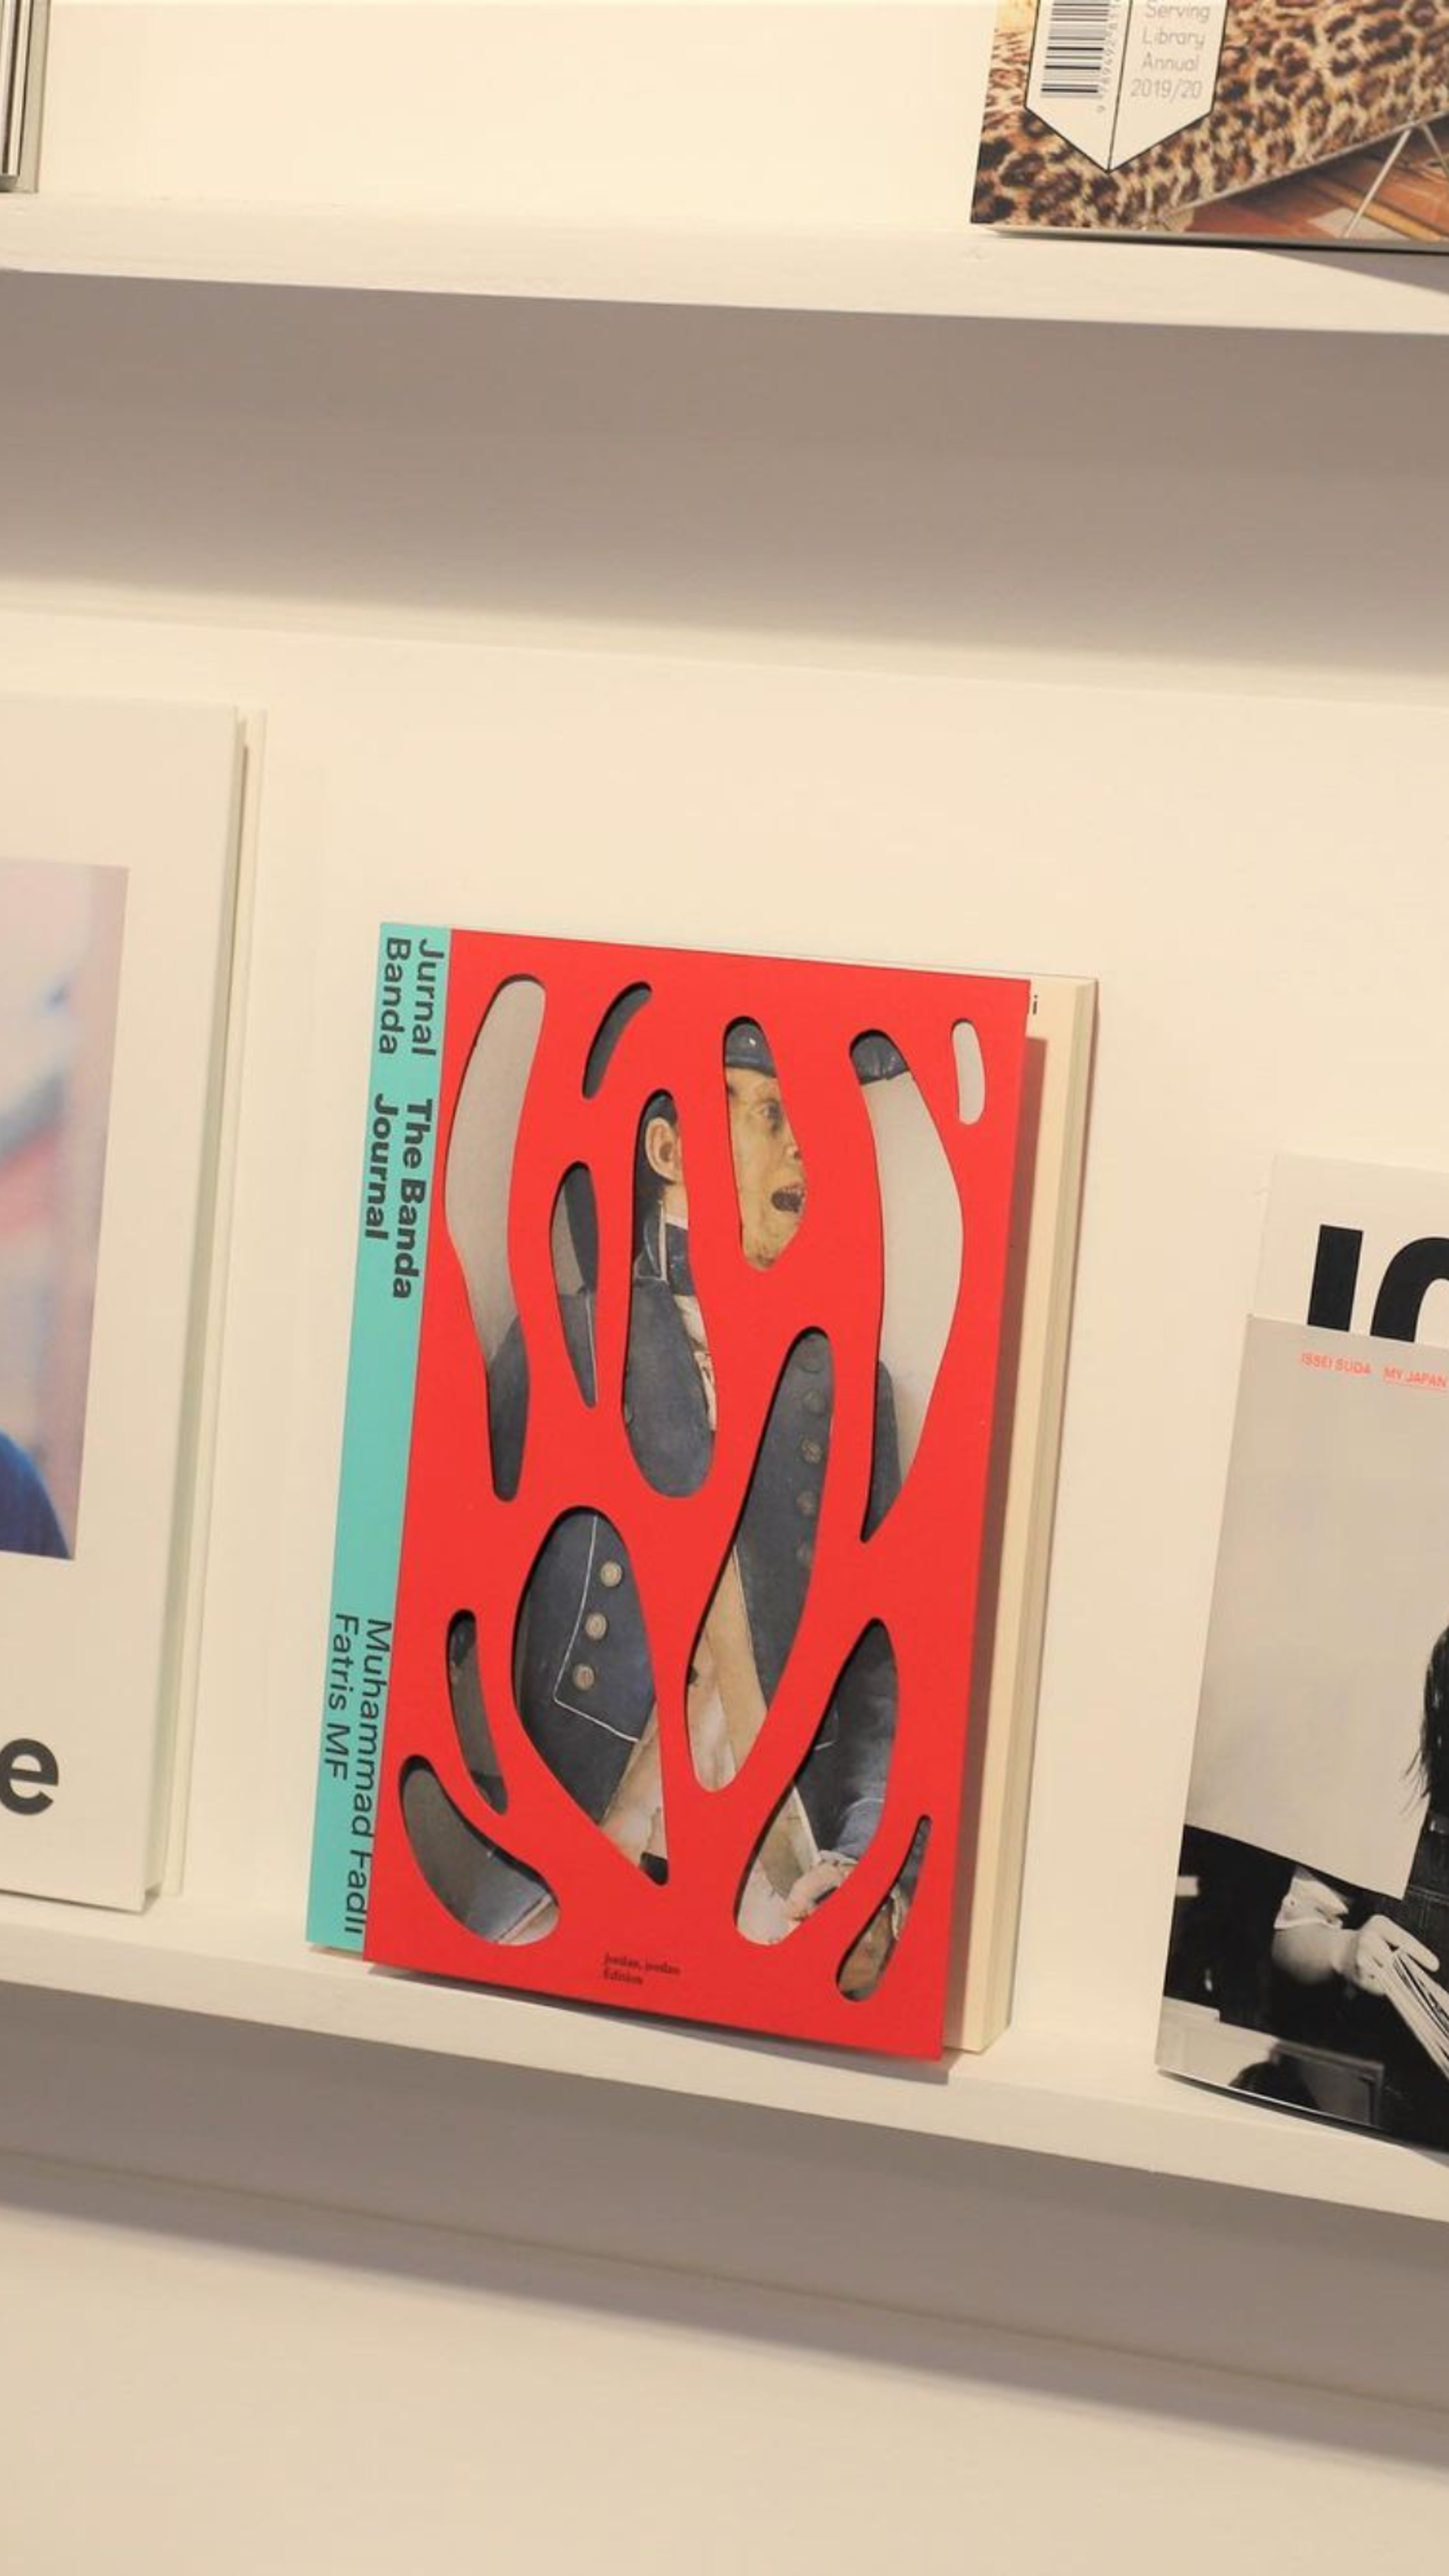 A book with a red abstract cover design featuring cut-out shapes revealing photographs beneath, displayed on a white shelf.